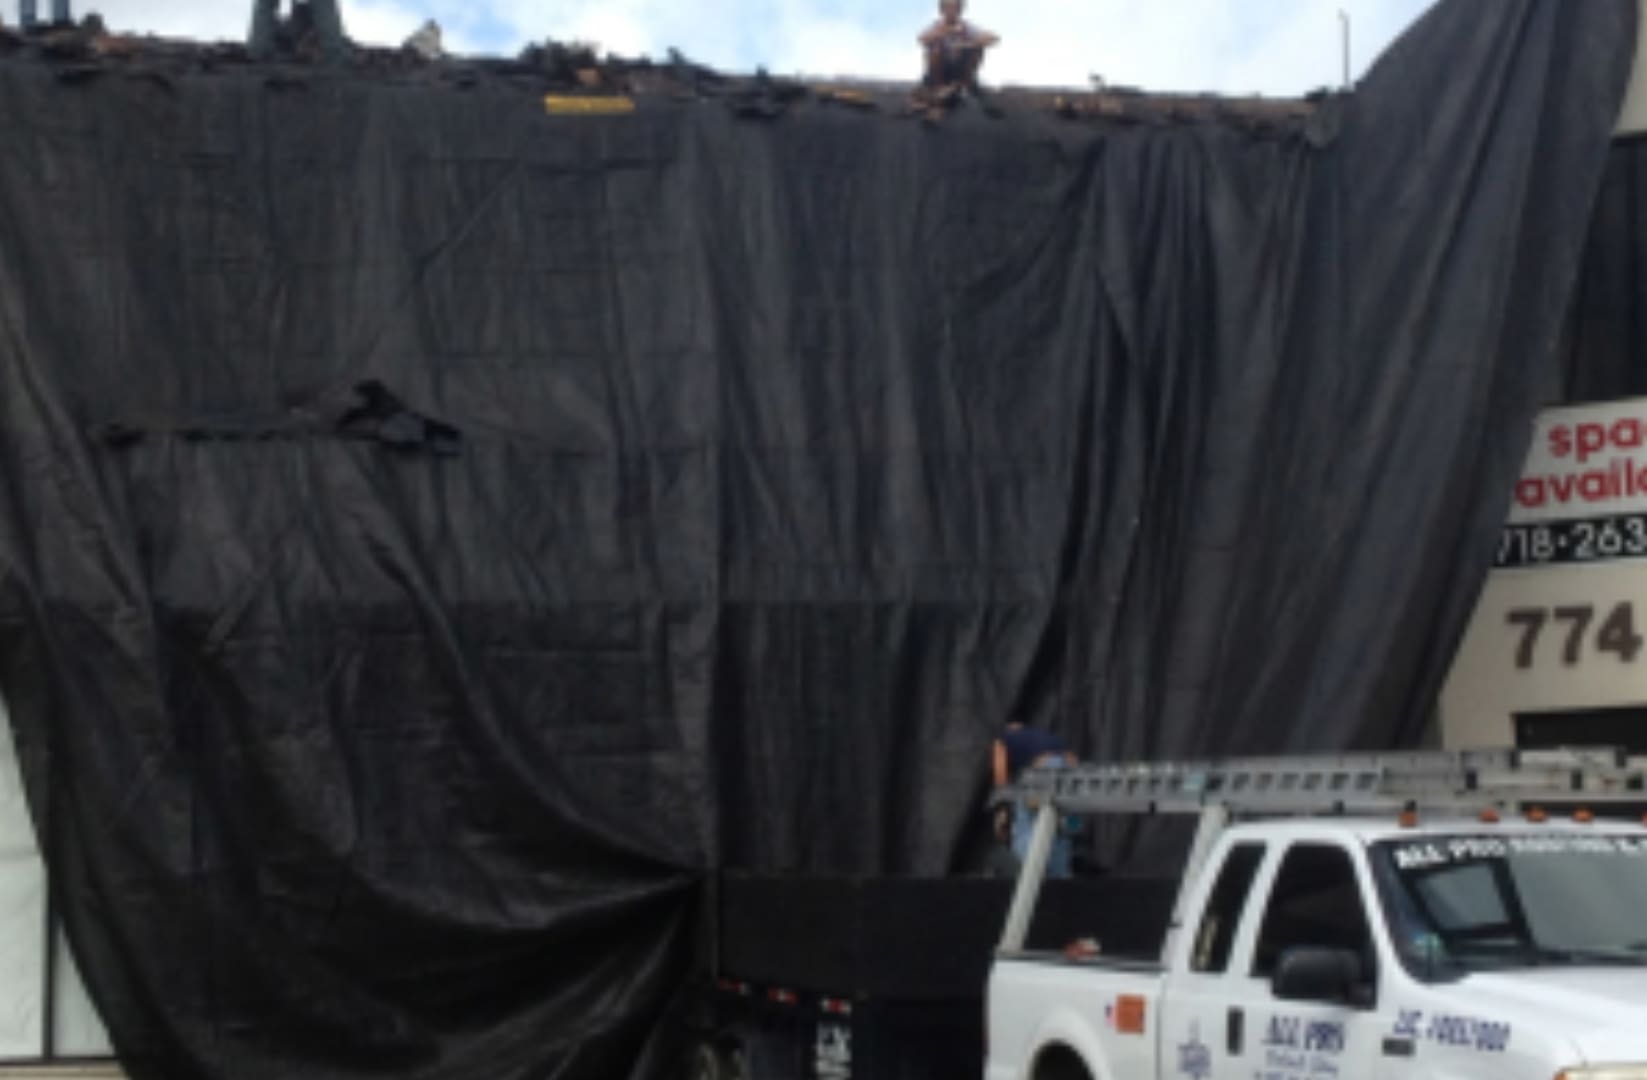 A truck parked in front of a black tarp.